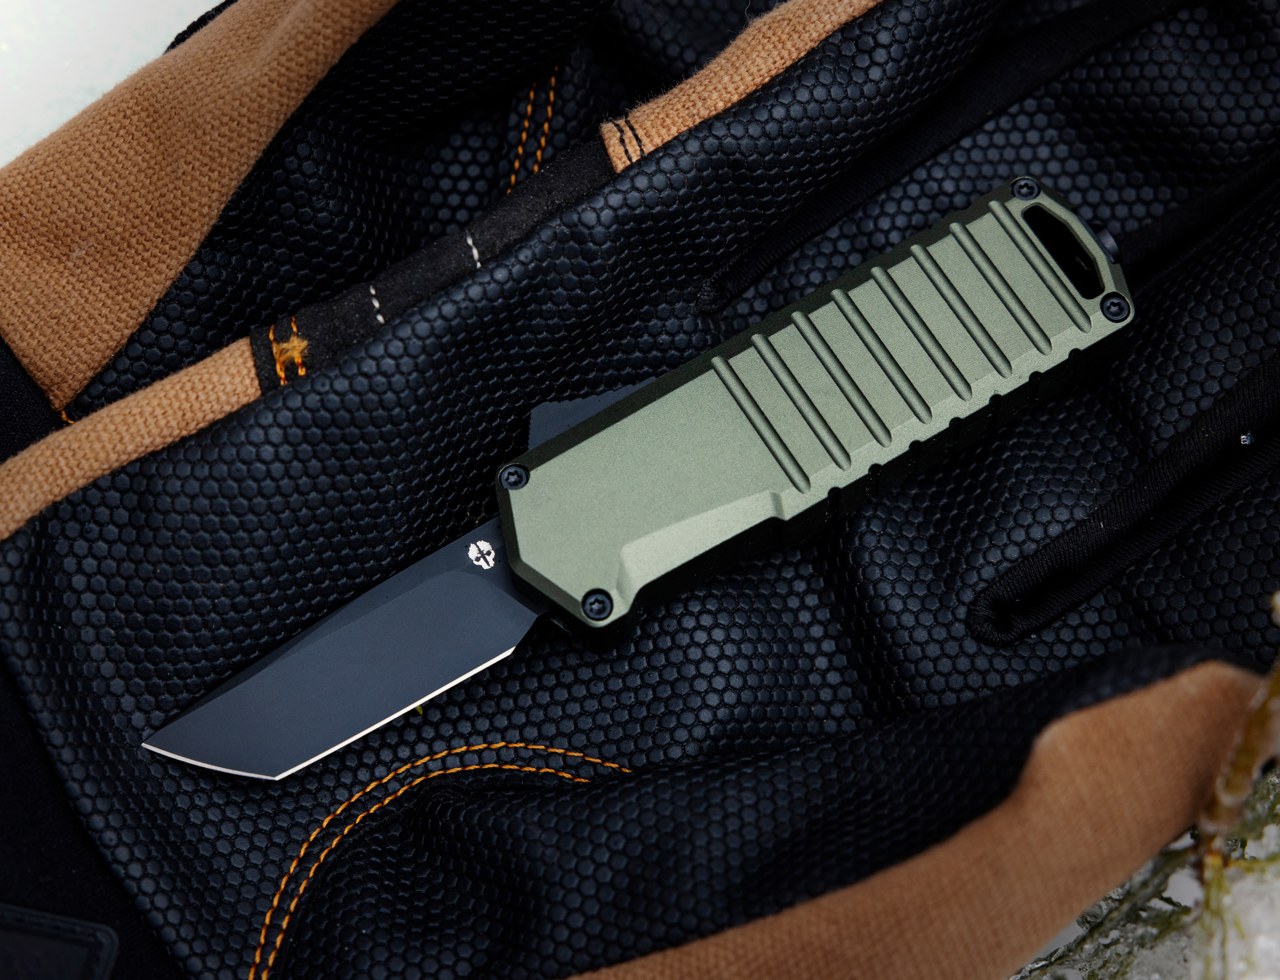 https://www.yankodesign.com/images/design_news/2023/03/compact_and_lightweight_yet_automatic_knife_packs_a_punch_6.jpg